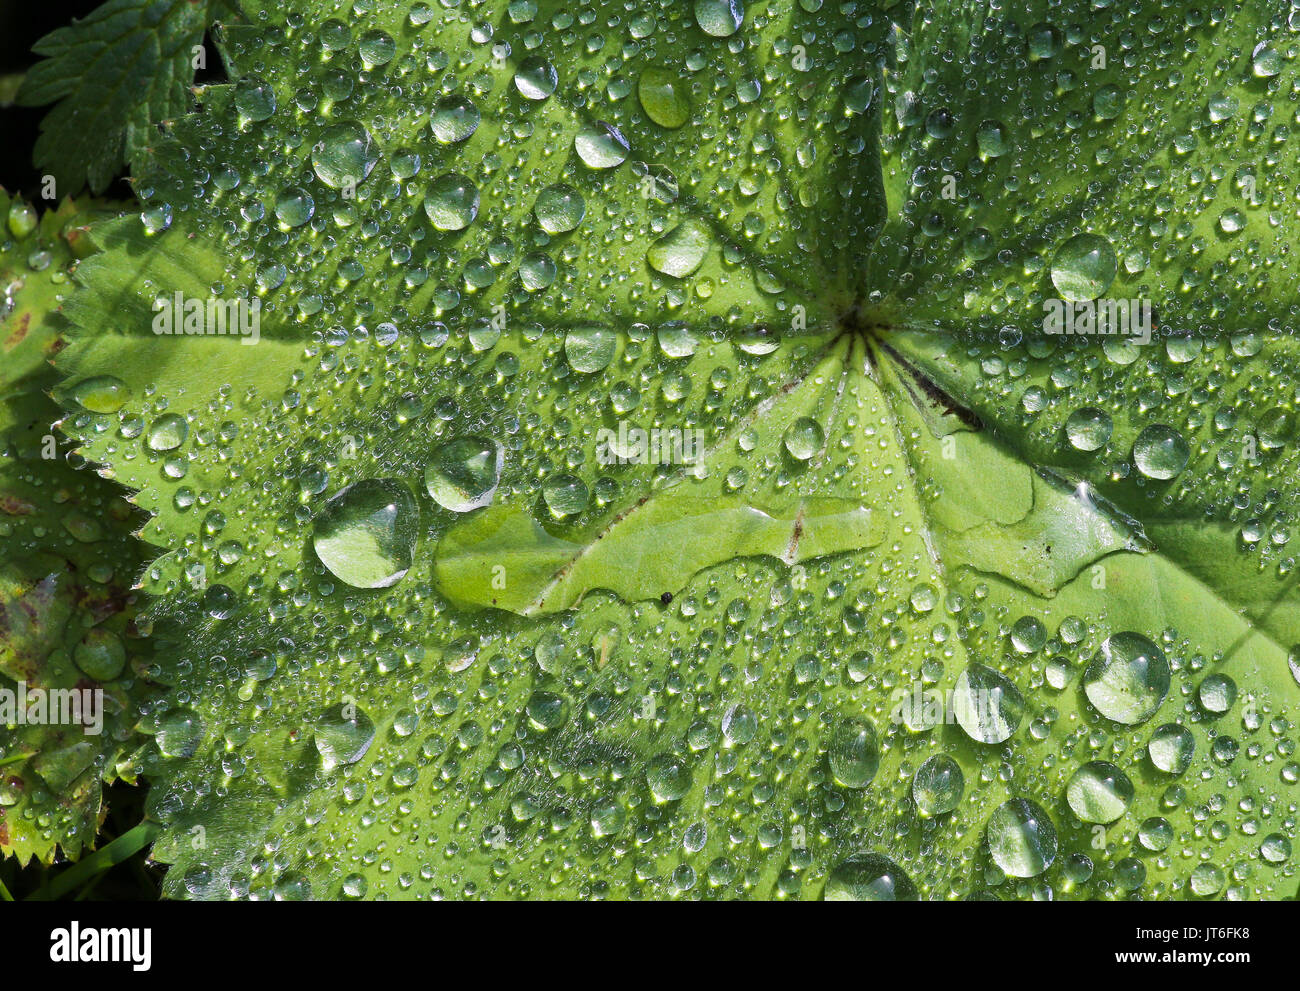 Alchemilla mollis - Ladies Mantel - fan-shaped leaves plant after a rain shower with sparkles in raindrops Stock Photo